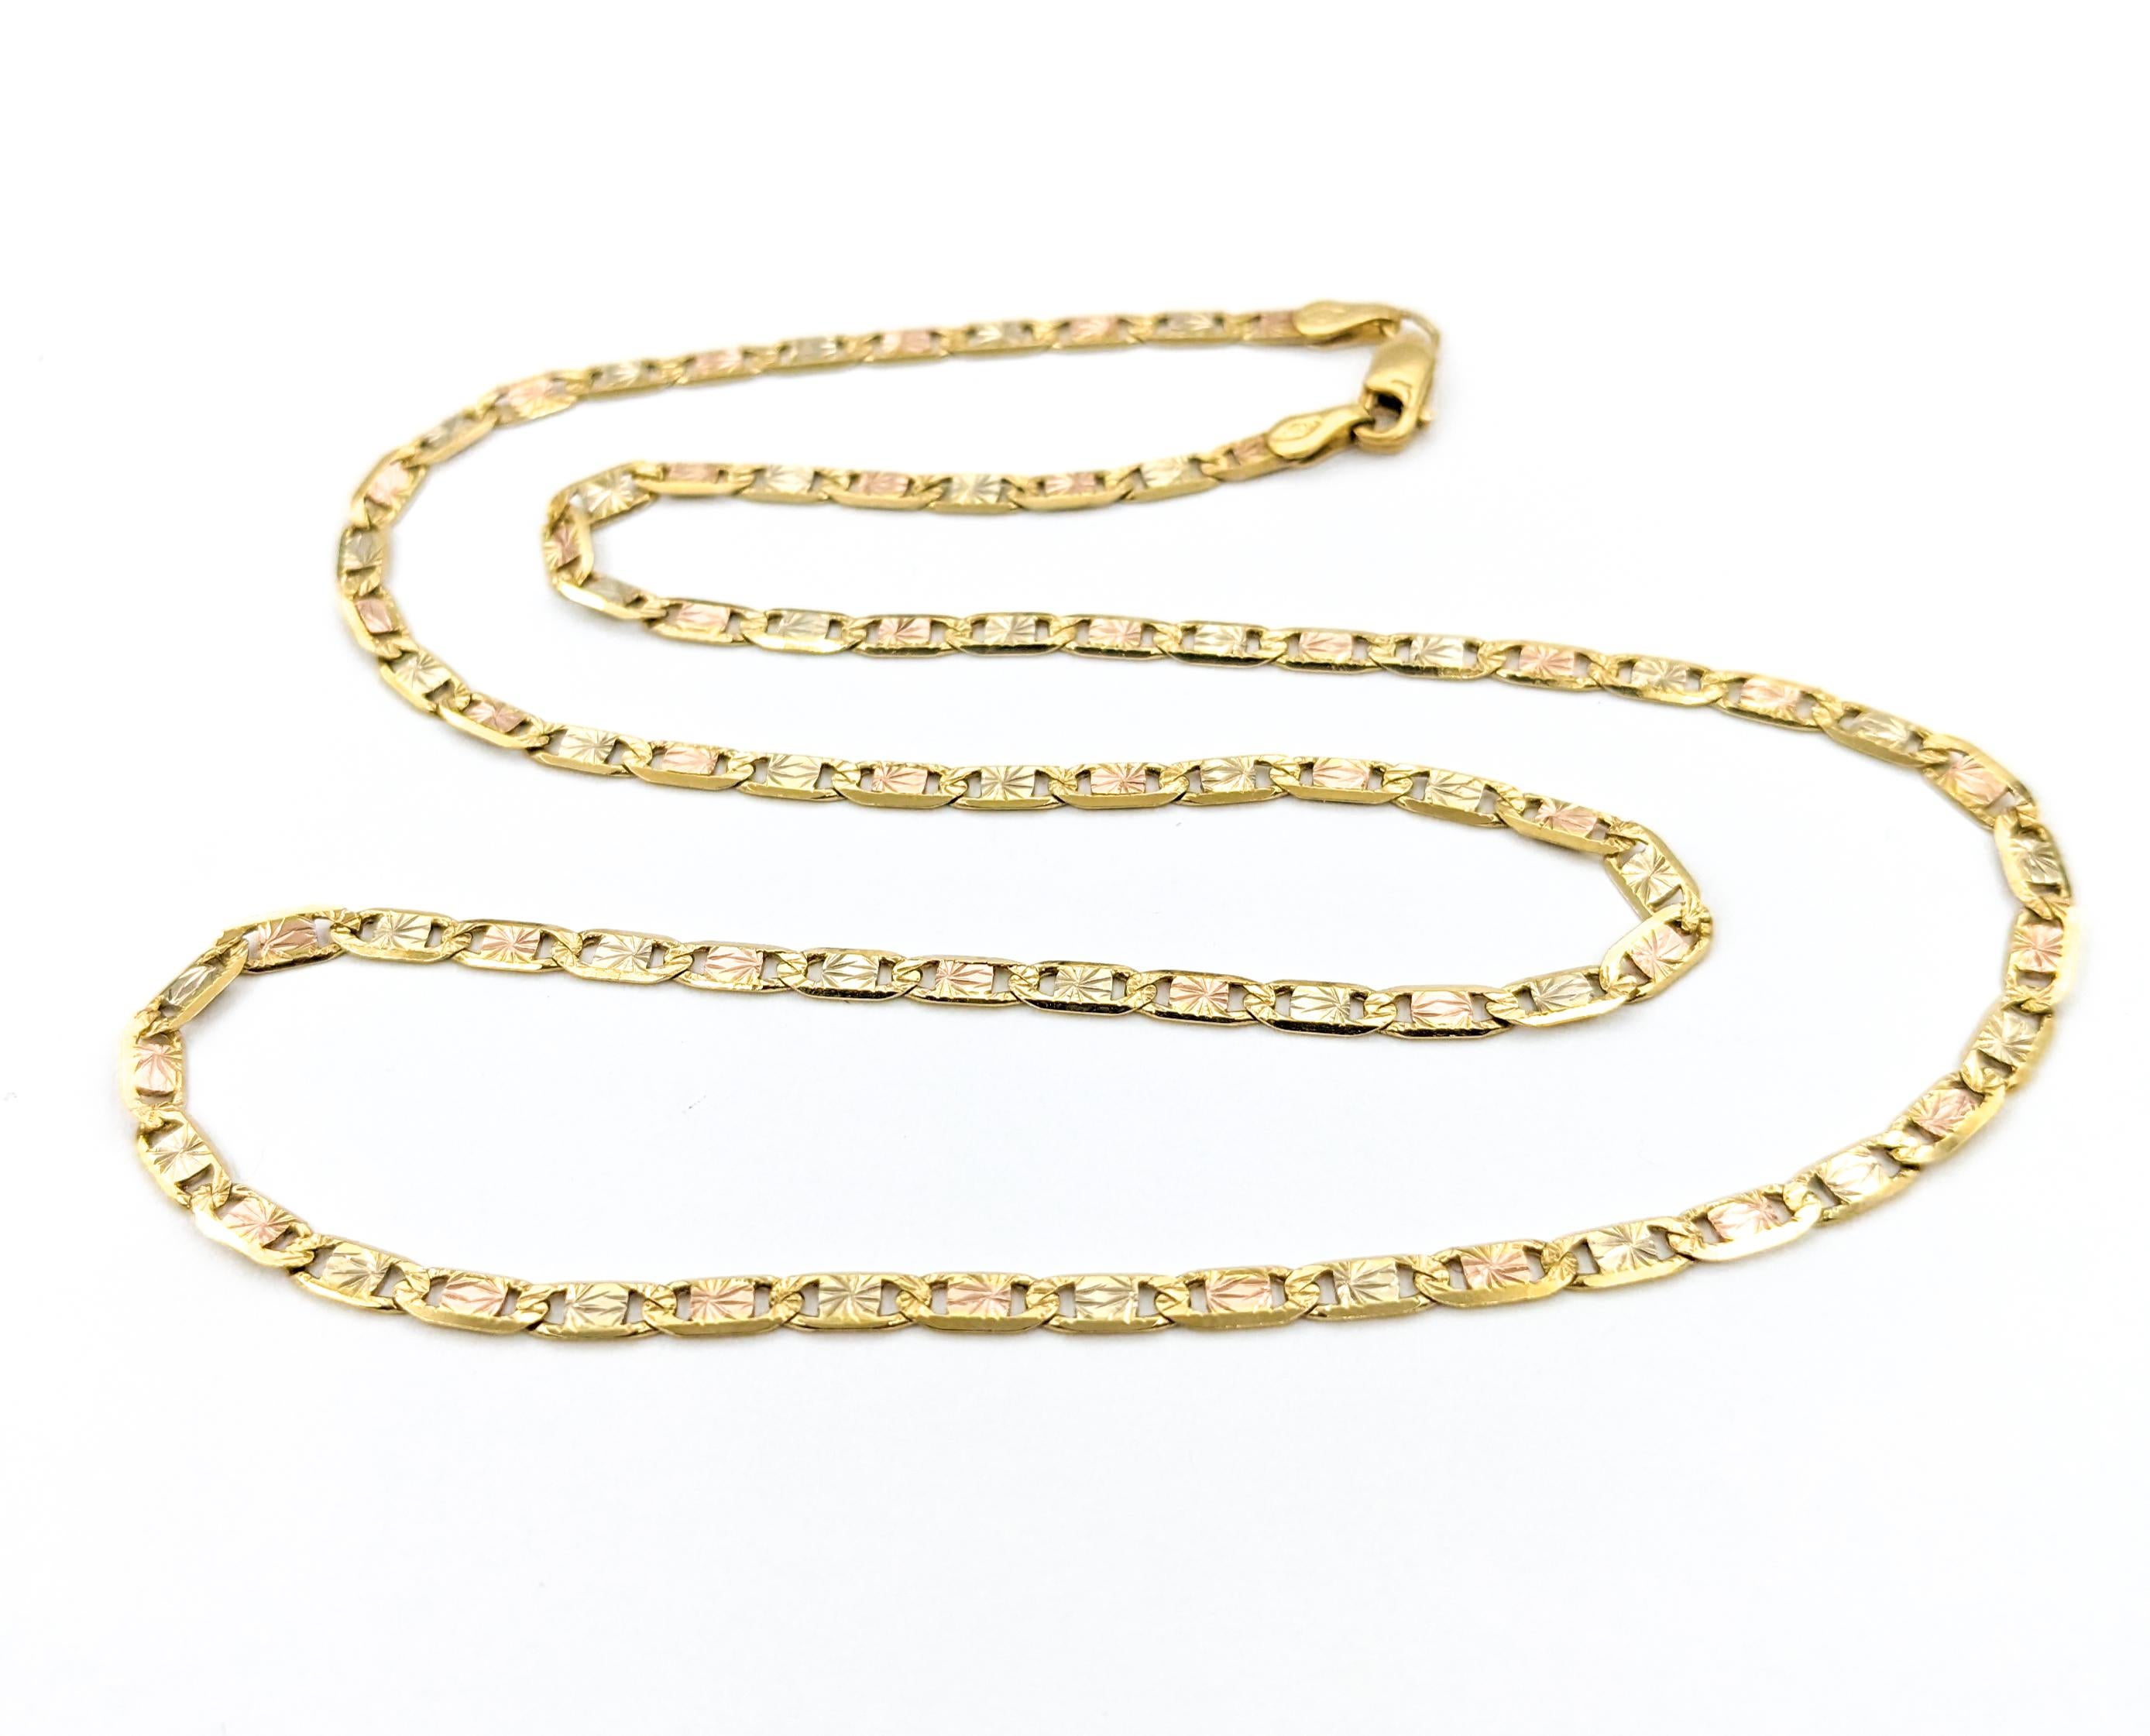 Gucci Link Design Necklace In Yellow Gold


Discover the timeless elegance of our Gold Fashion Necklace, meticulously crafted in 14kt yellow gold. This exquisite piece features a classic Gucci link design, offering both sophistication and